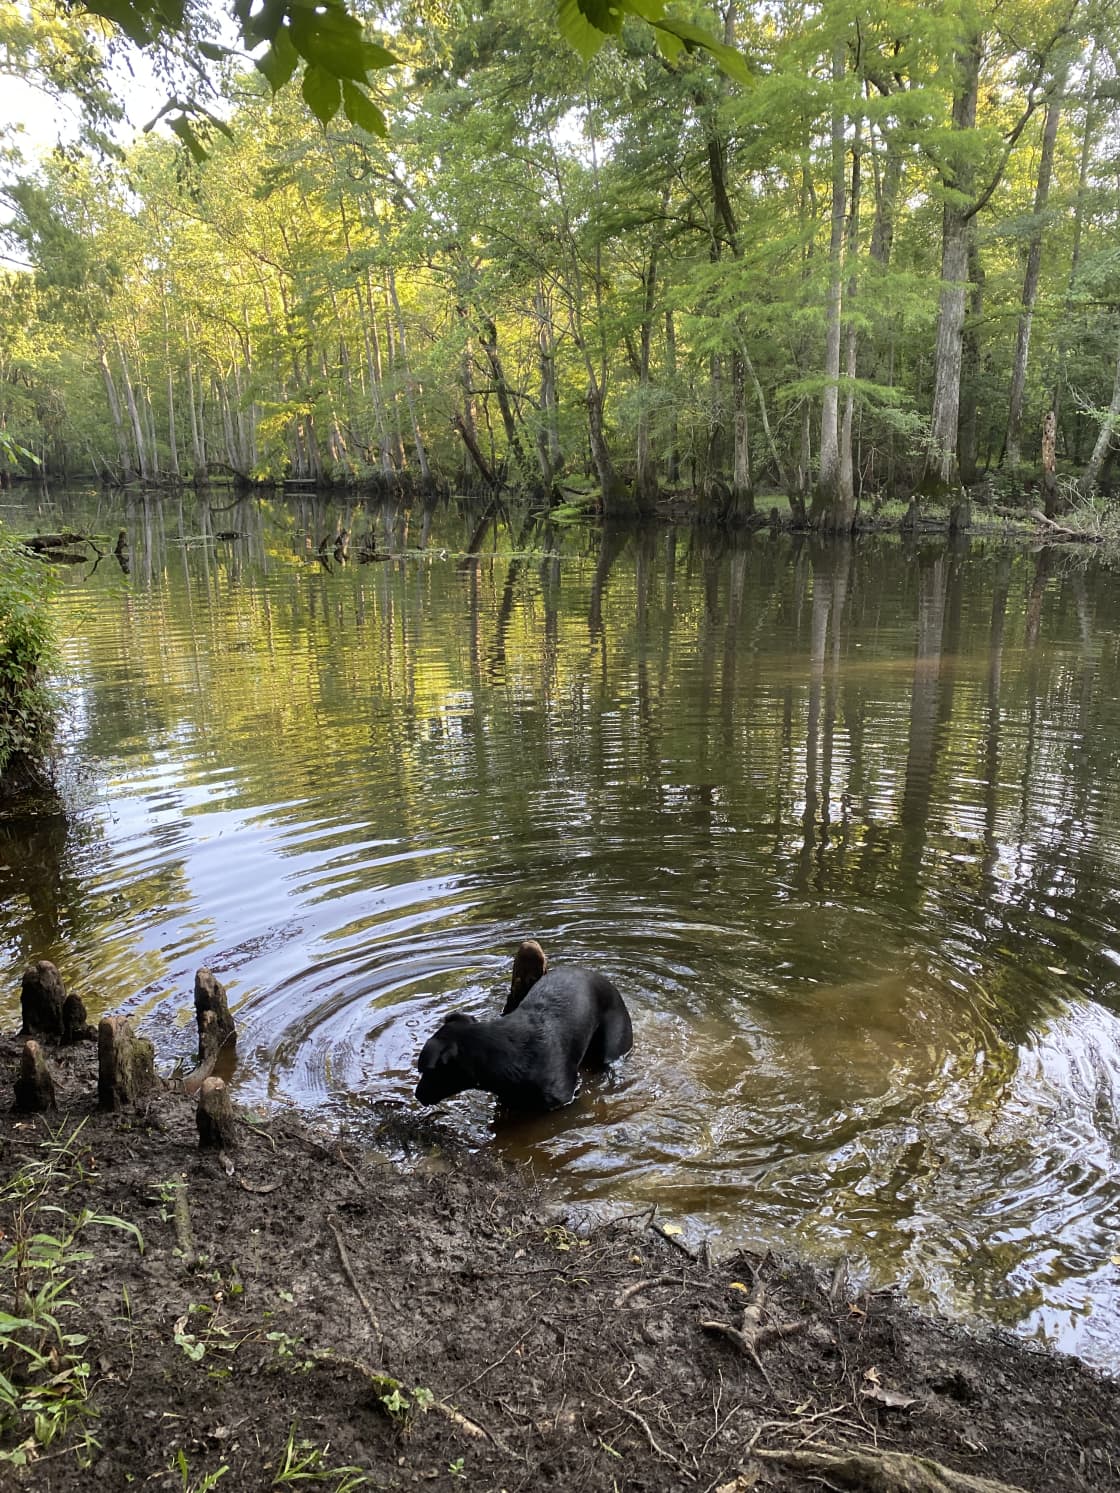 My dogs love wading in the creek.